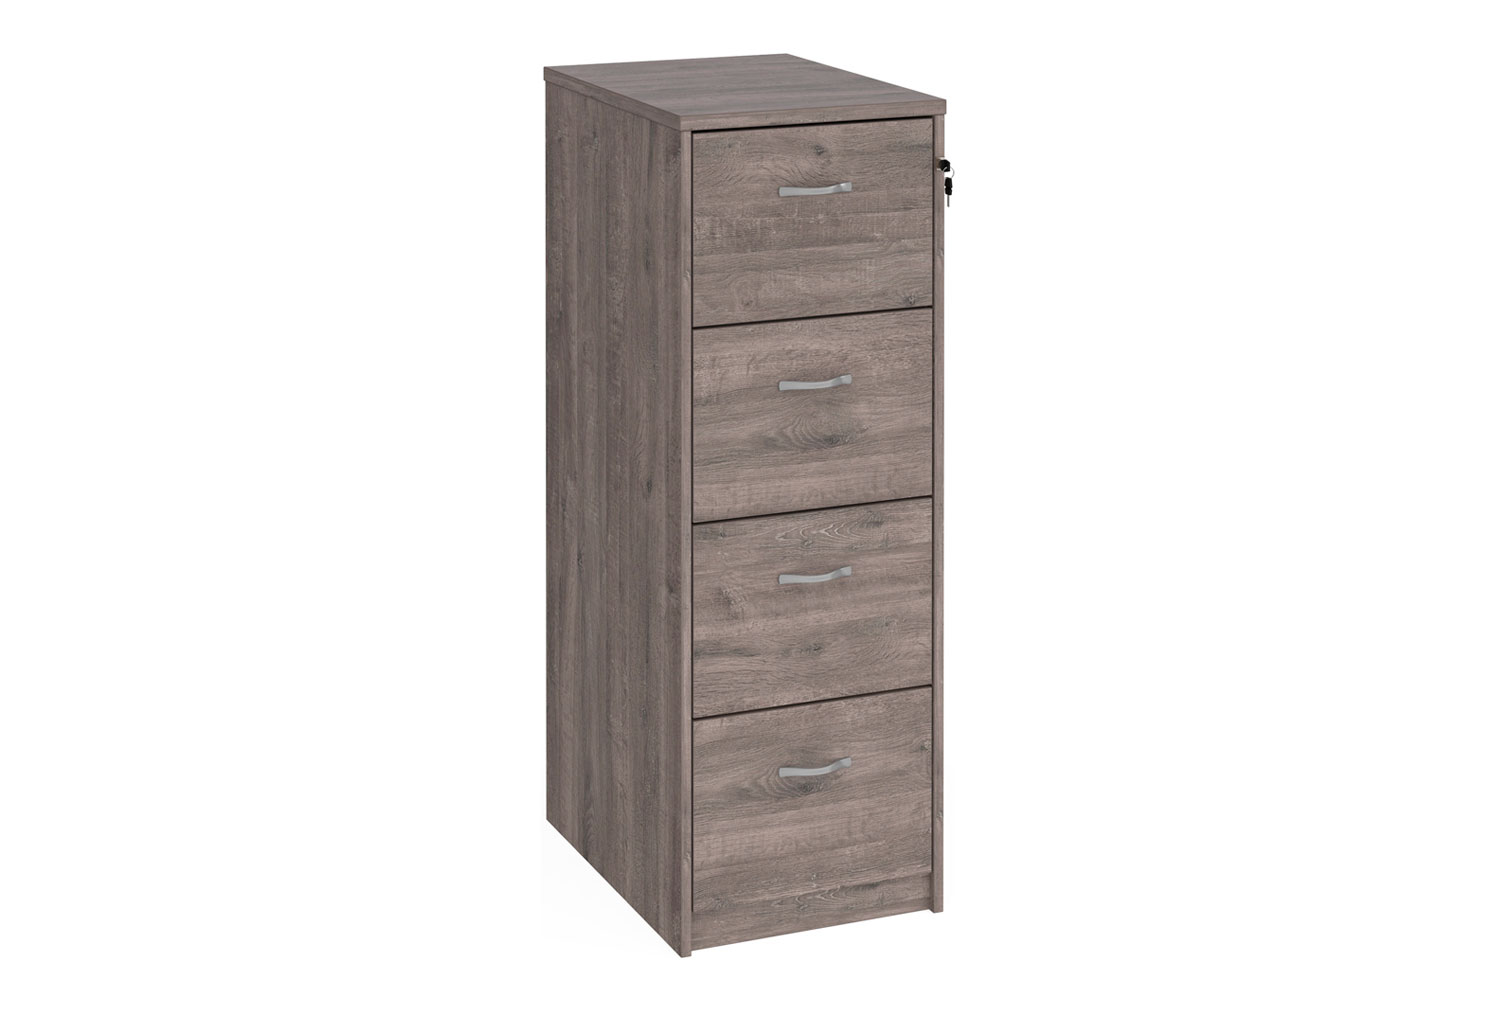 Tully Filing Cabinets, 4 Drawer - 48wx66dx136h (cm), Grey Oak, Fully Installed